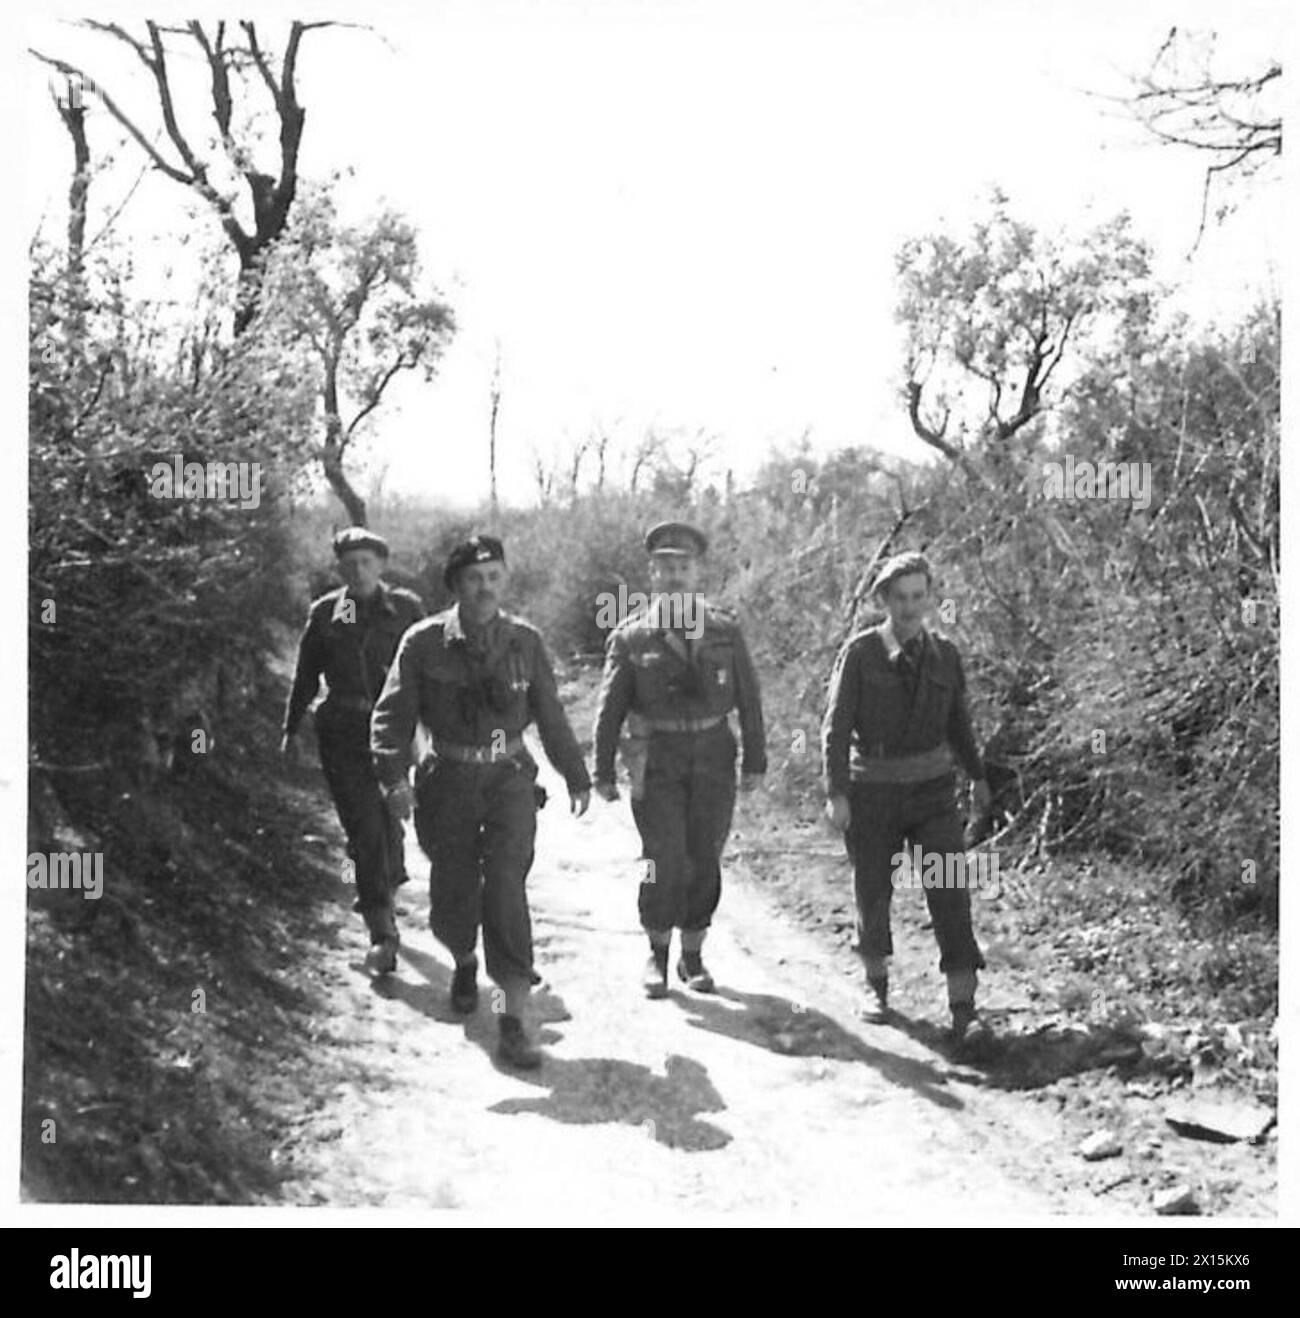 ALLIED ARMIES IN THE ITALIAN CAMPAIGN, 1943-1945 - General Władysław Anders, the CO of the 2nd Polish Corps, being led by Brigadier Thrith (second from the right) towards the British 78th Infantry Division HQ at Cervaro (near Cassino) during his visit to the 78th Division. They are accompanied by Lieutenant Eugeniusz Lubomirski, General Anders' adjutant (first from the left) British Army, Polish Army, Polish Armed Forces in the West, Polish Corps, II, 78th Infantry Division, British Army, 8th Army, Anders, Władysław, Lubomirski, Eugeniusz, Thrith (Brigadier) Stock Photo